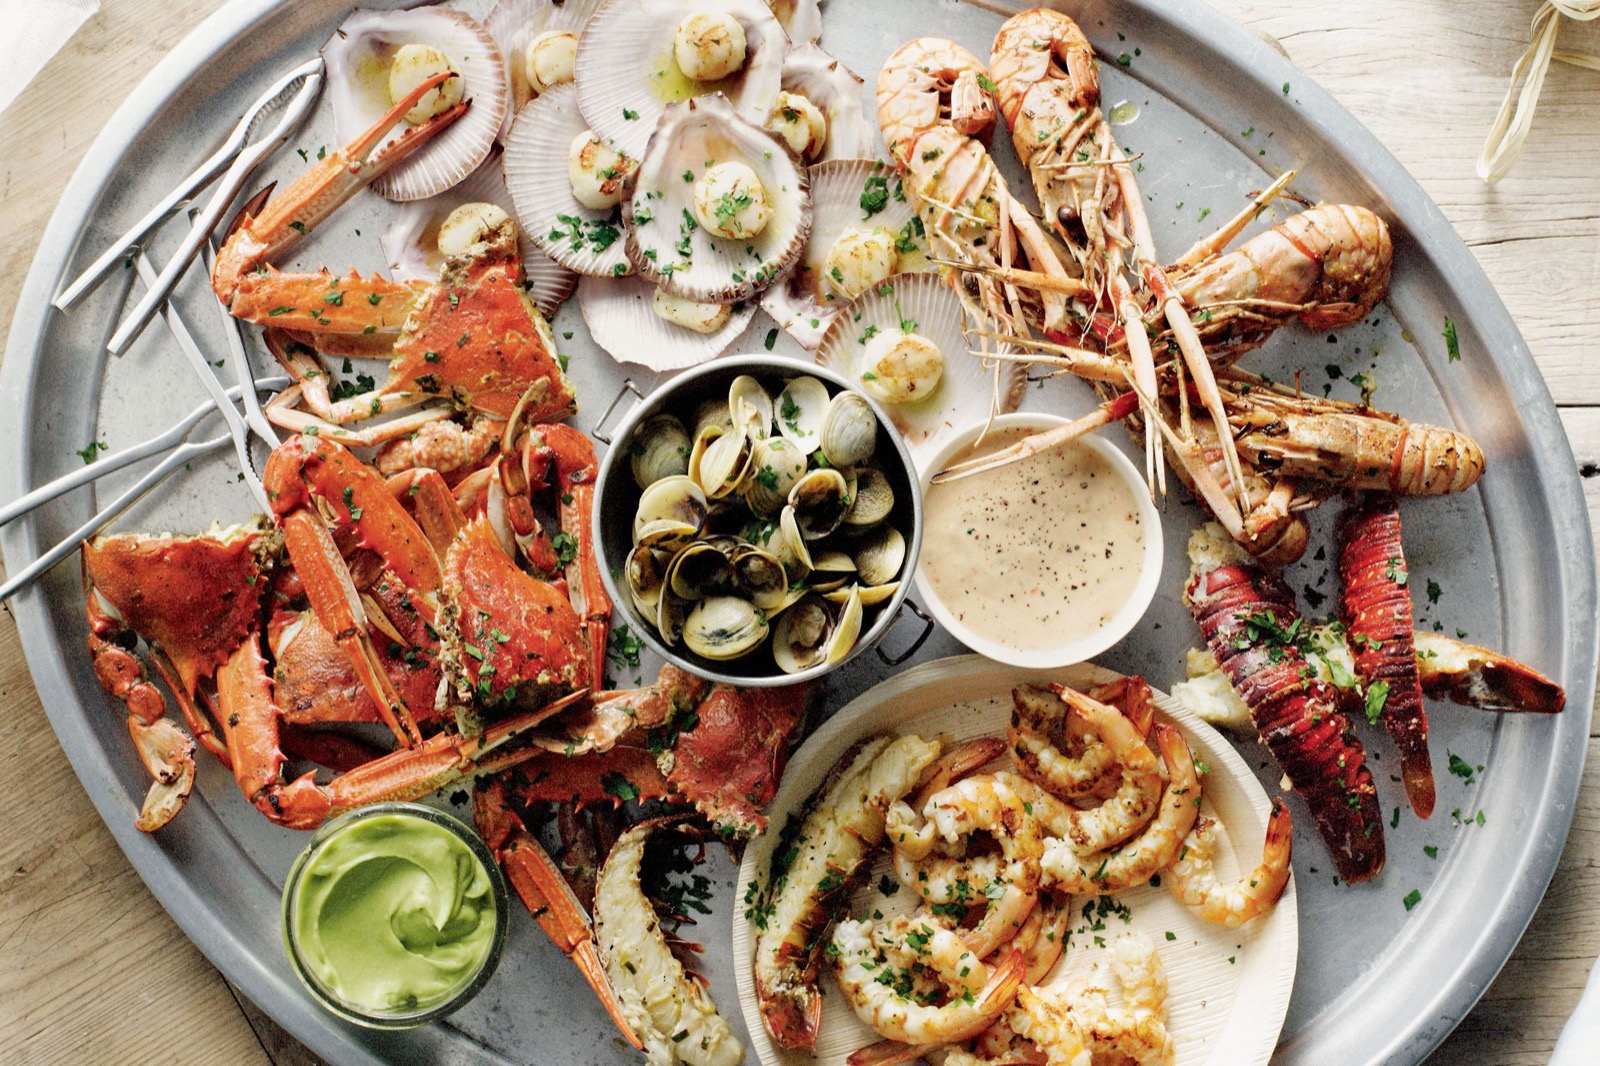 🍤 Can We Guess Your Age and Gender Based on the Seafood Dishes You’ve Eaten? Seafood Platter